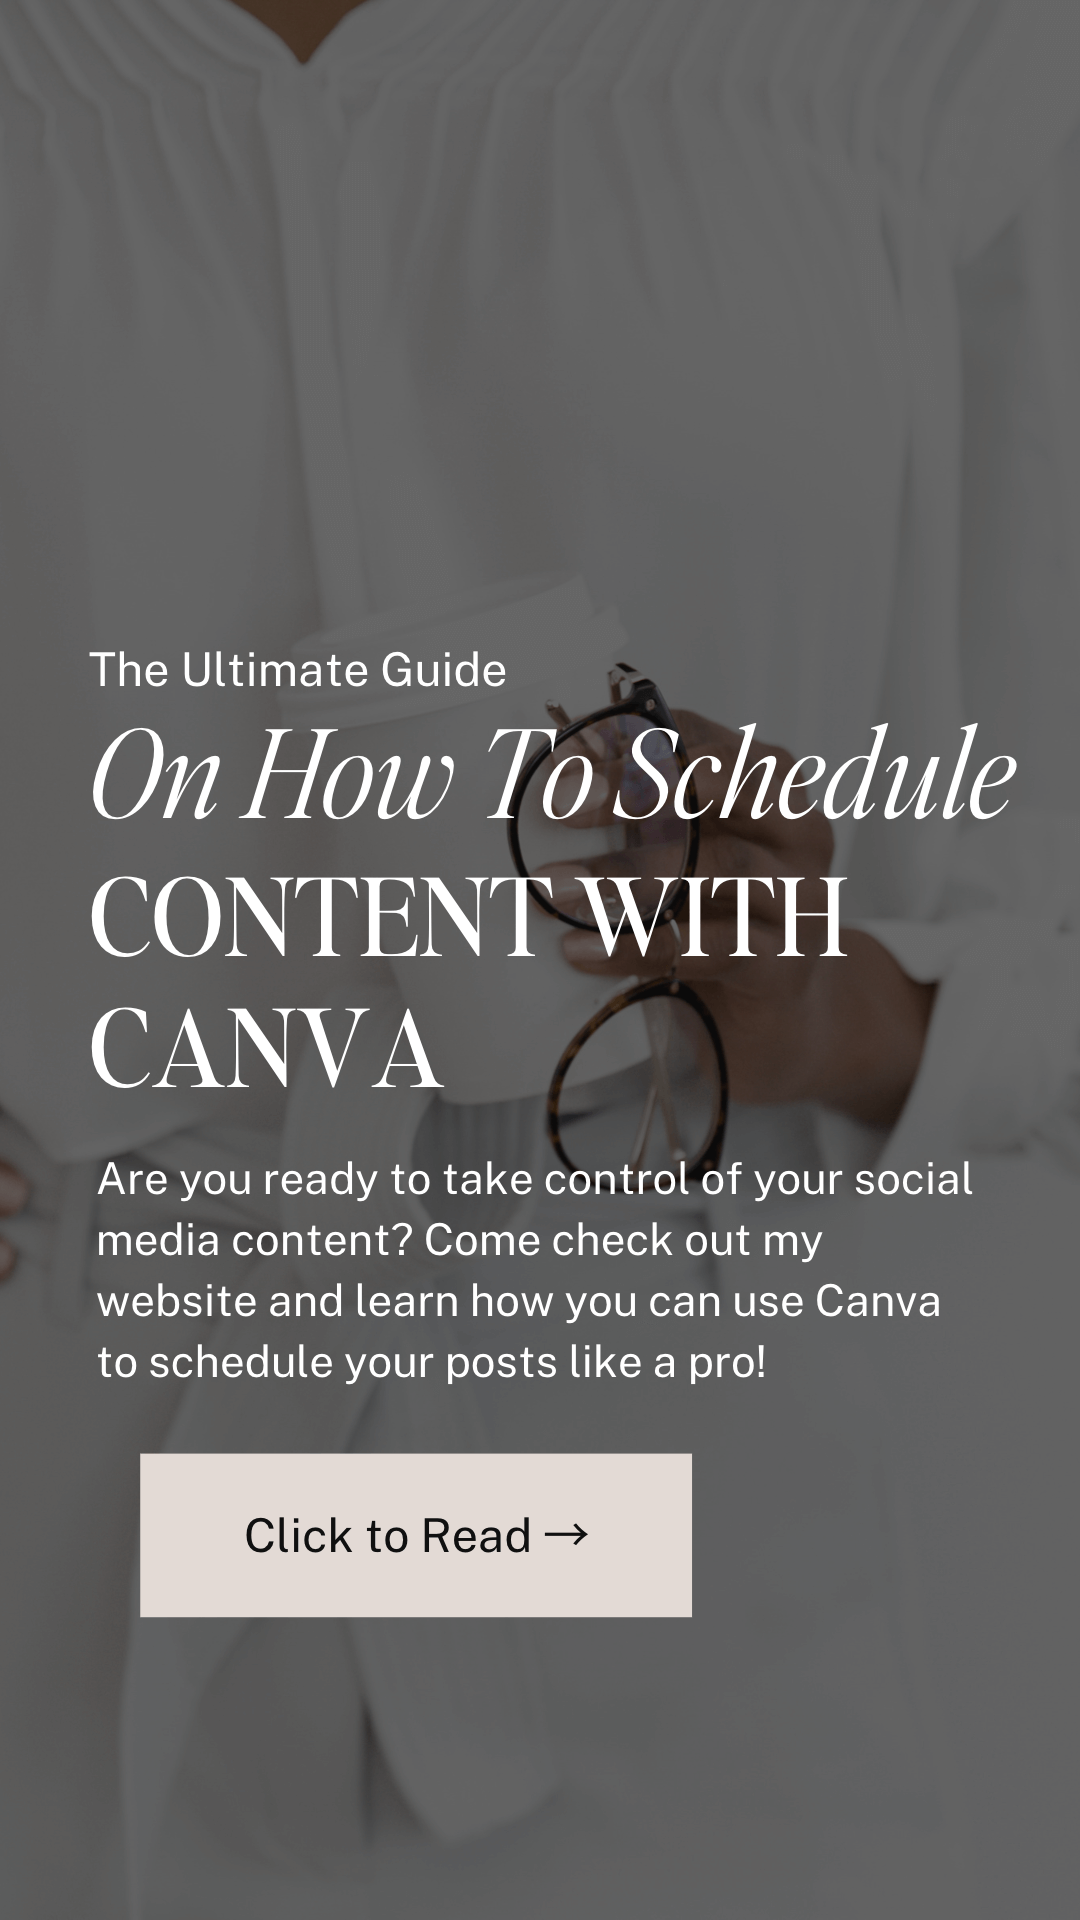 The Ultimate Guide to Using Canva to Sell on